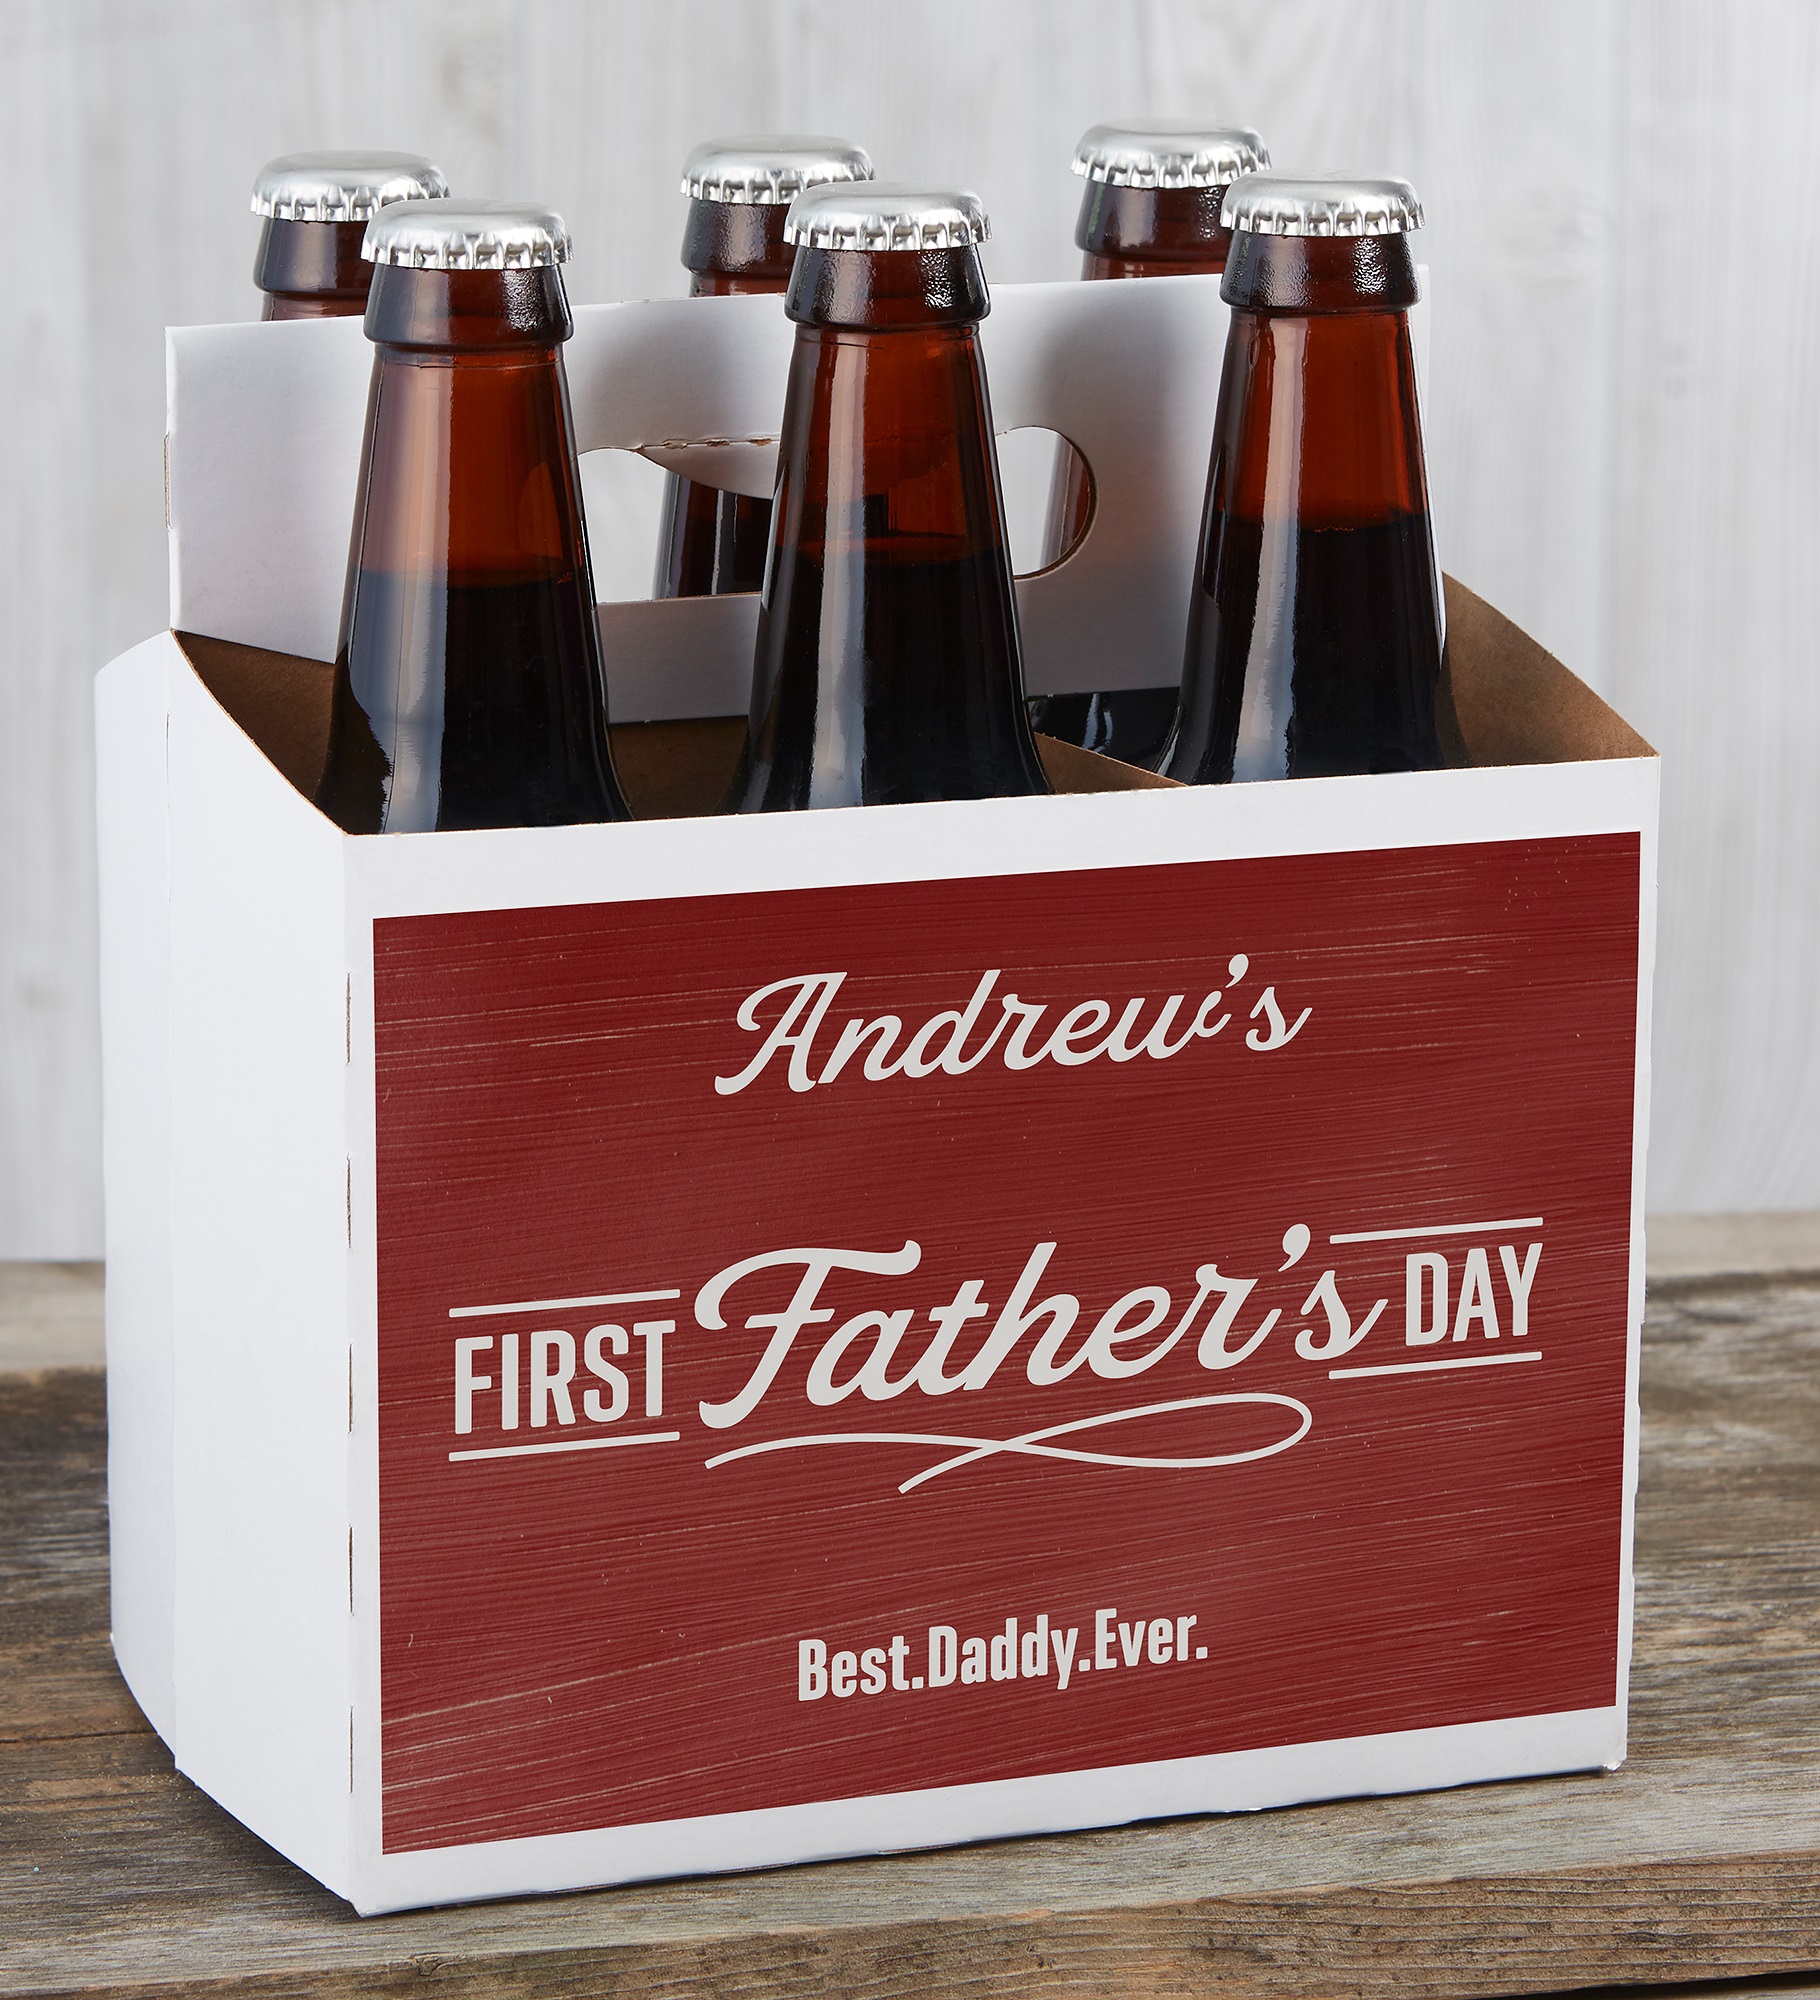 Daddy's First Father's Day Personalized Beer Bottle Labels & Bottle Carrier